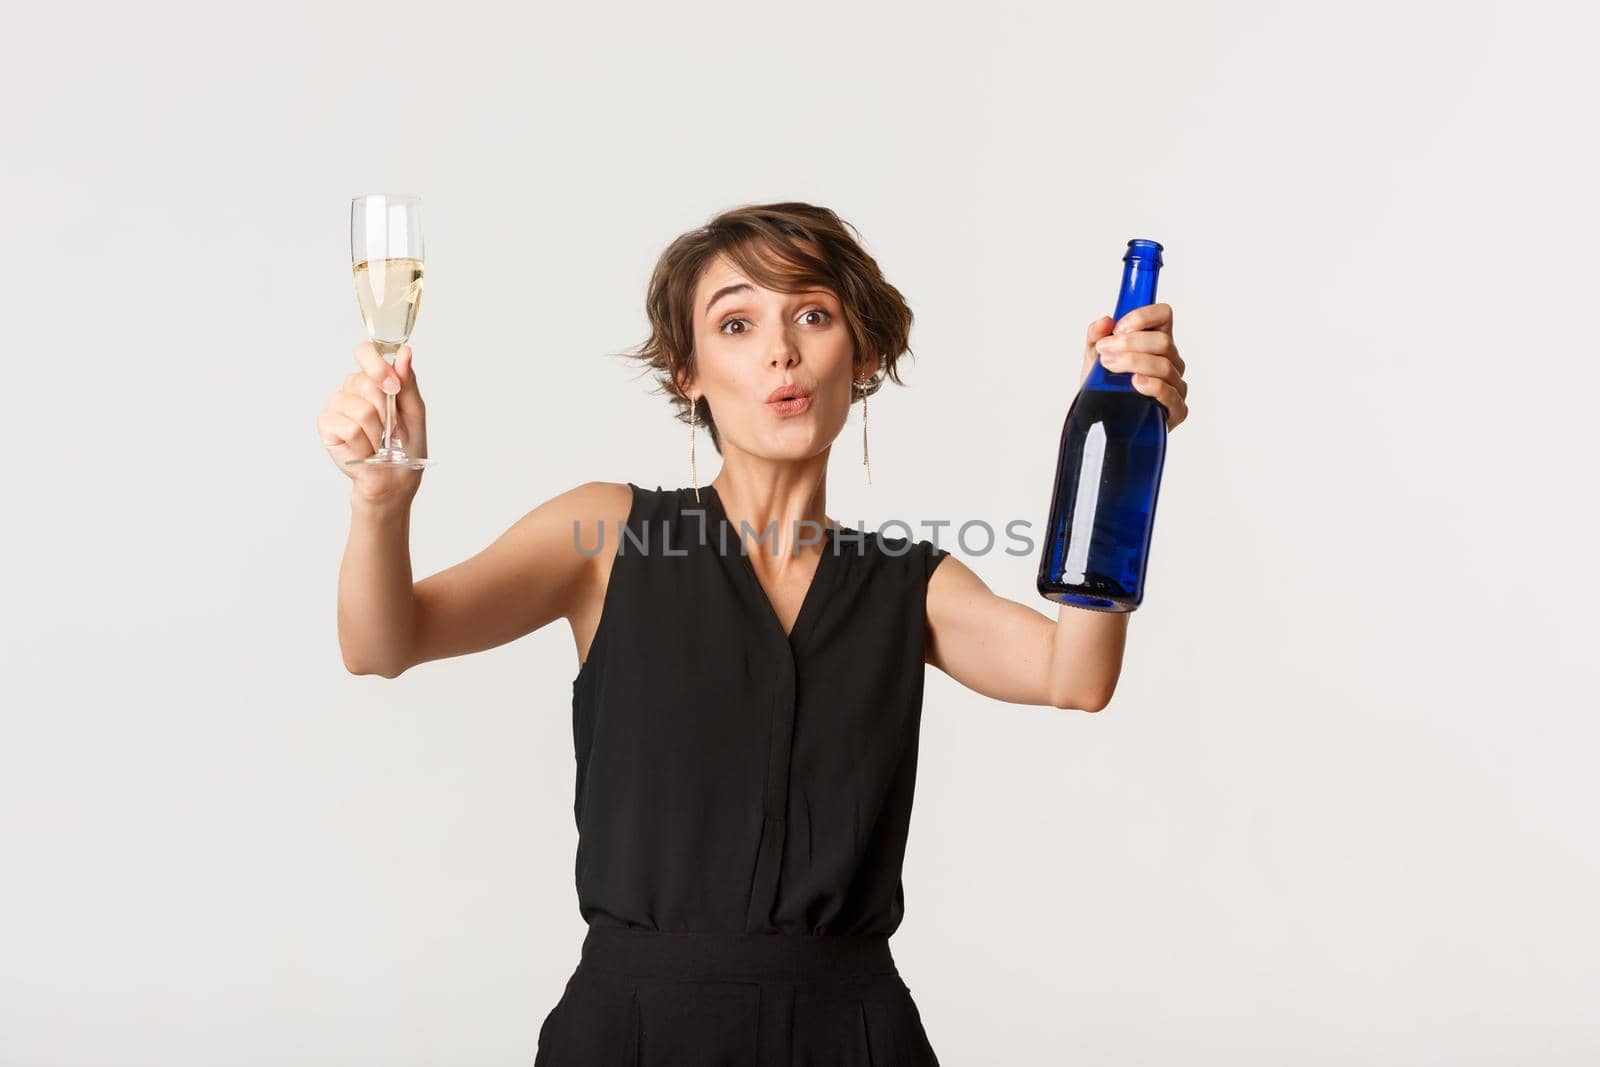 Cheerful elegant woman having fun on party, celebrating something, dancing with bottle and glass of champagne, standing over white background.